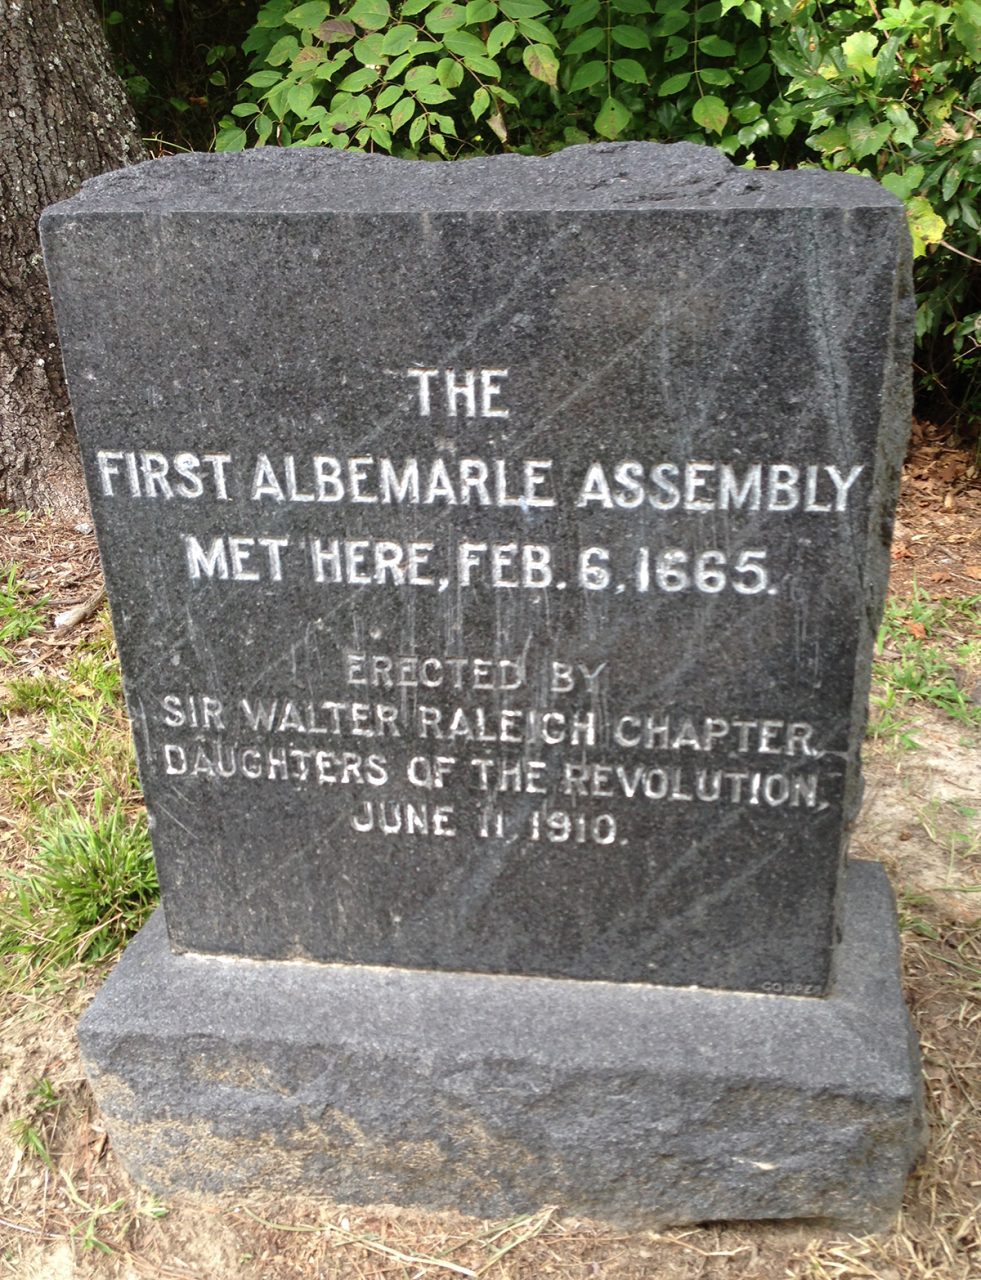 A monument to the First Albemarle Assembly was dedicated June 11, 1910, and is just off Halls Creek Road near Elizabeth City. Photo: Eric Medlin